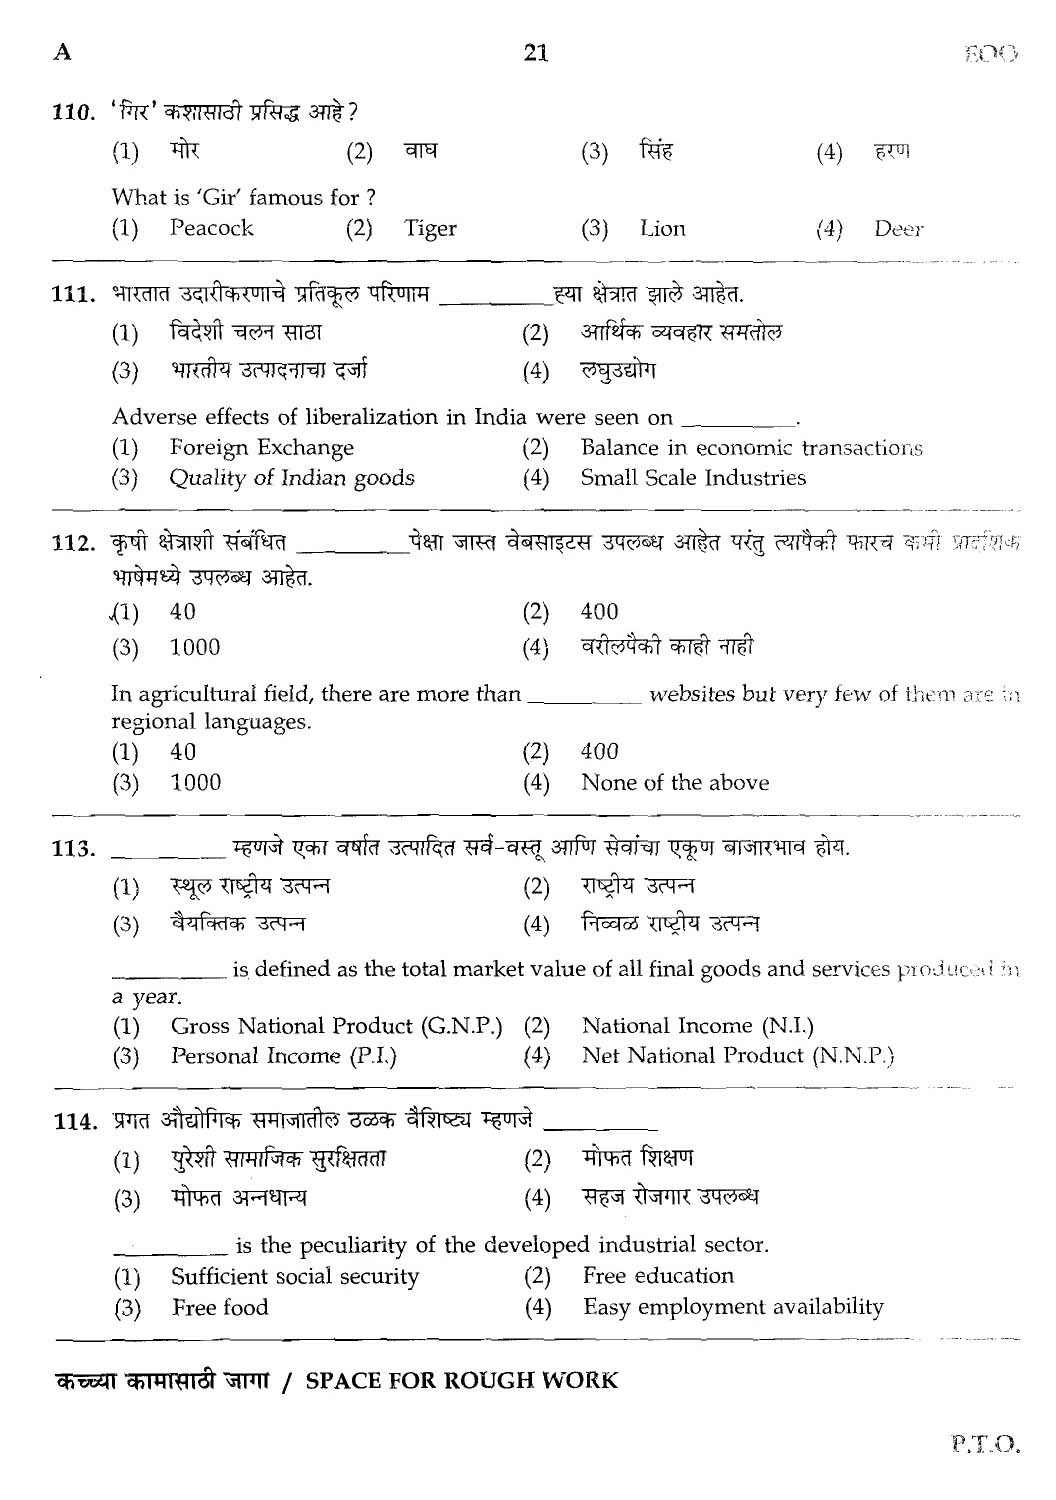 MPSC Agricultural Services Preliminary Exam 2012 Question Paper 20